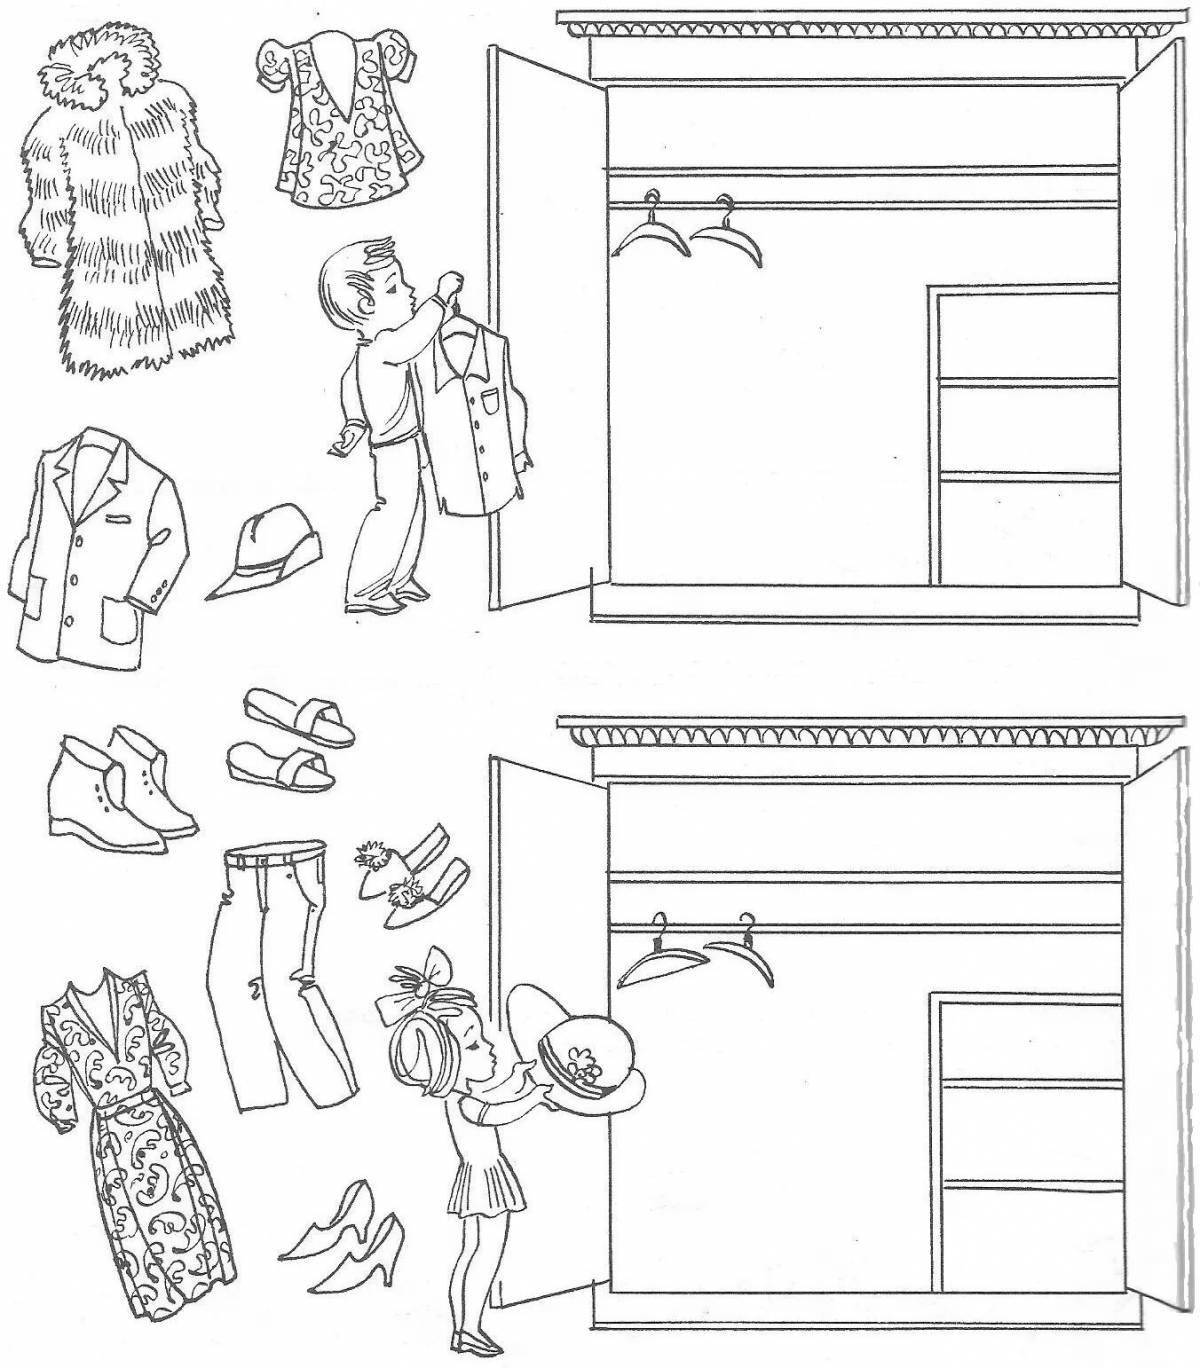 Creative wardrobe coloring book for 3-4 year olds